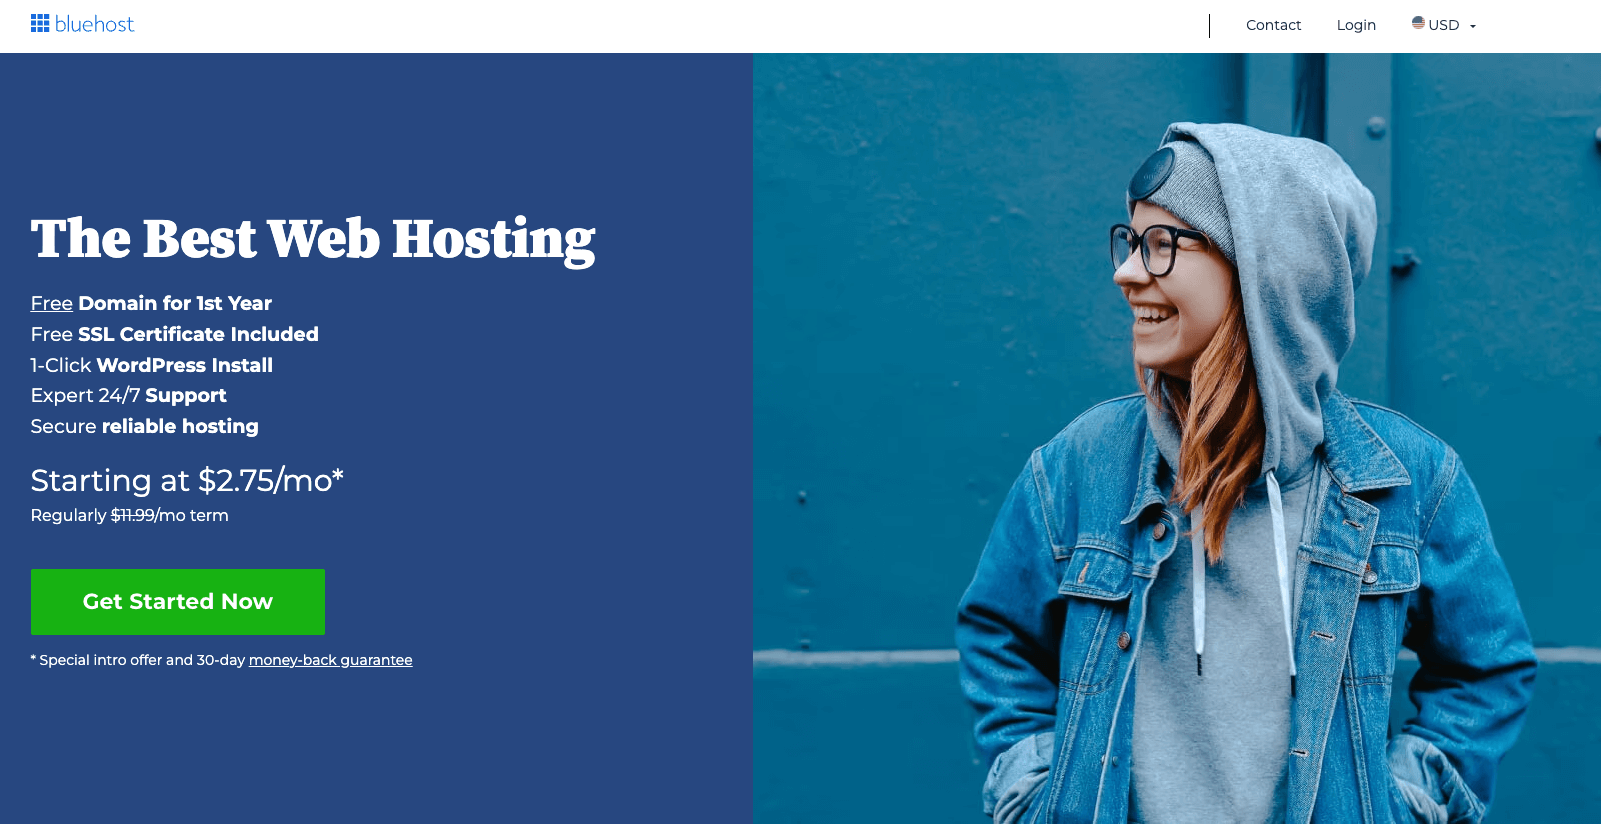 PCI compliant web hosting available from Bluehost.